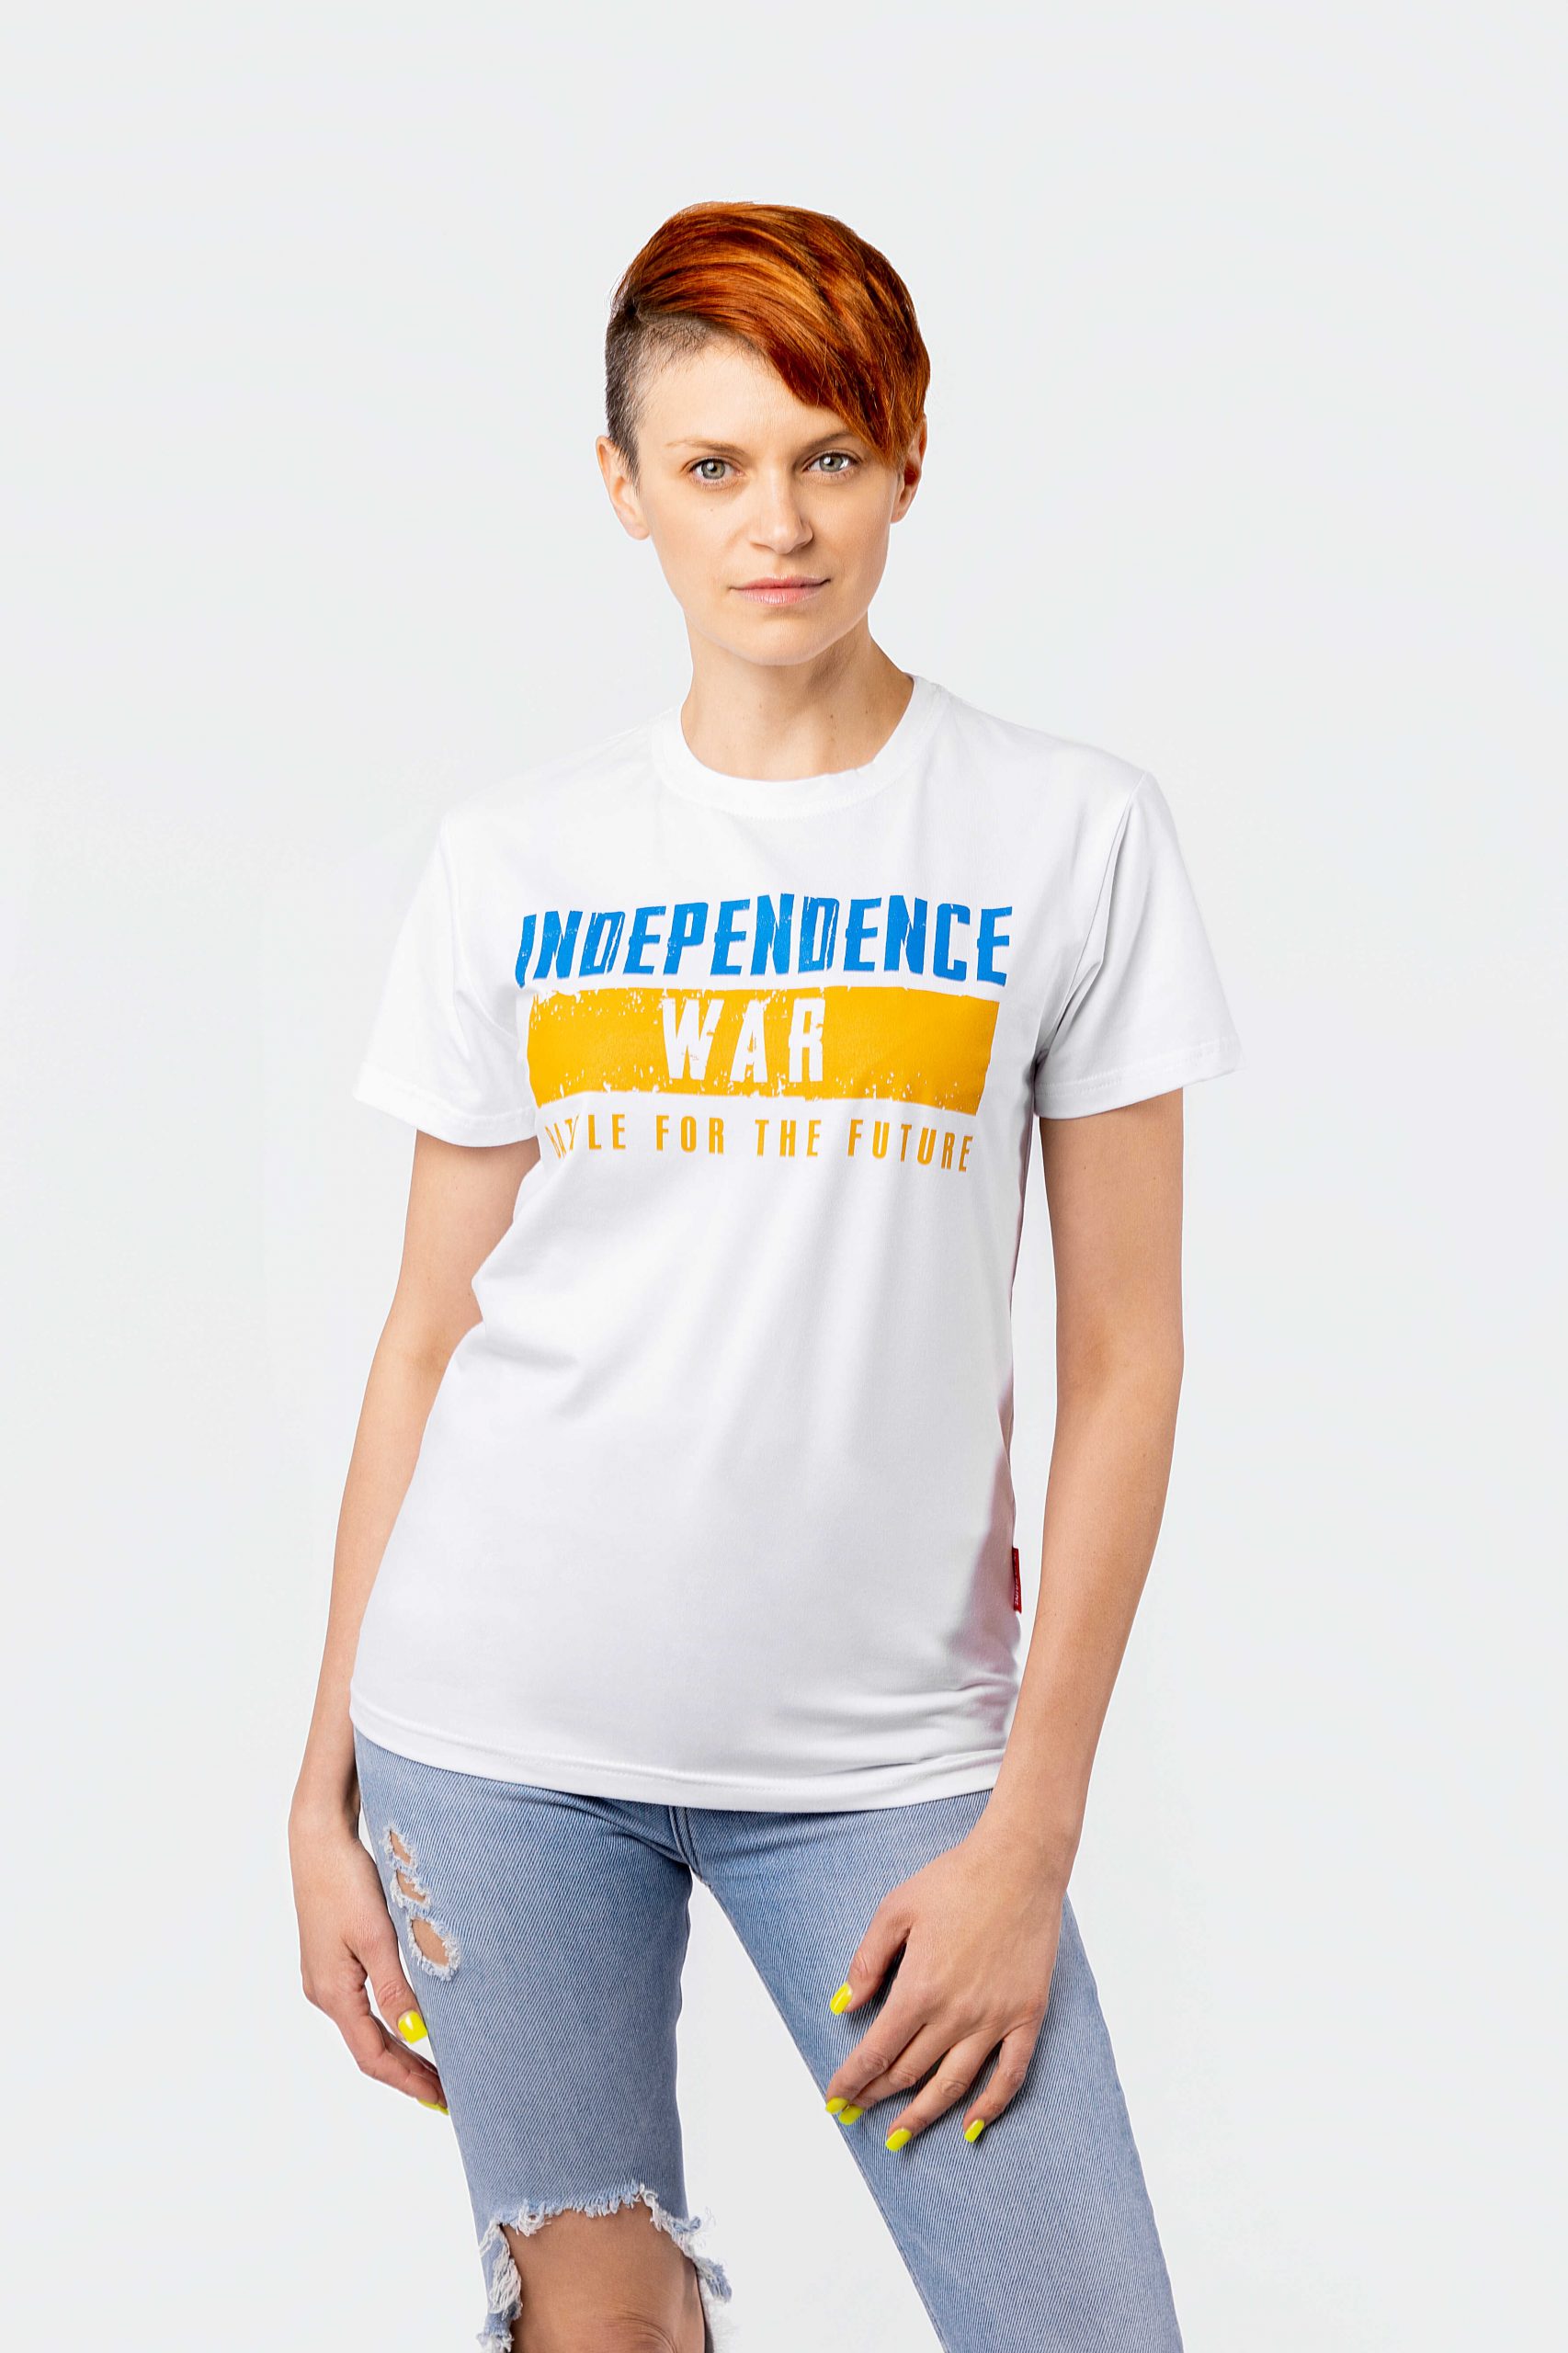 Women's T-Shirt Independence War. Color white. .